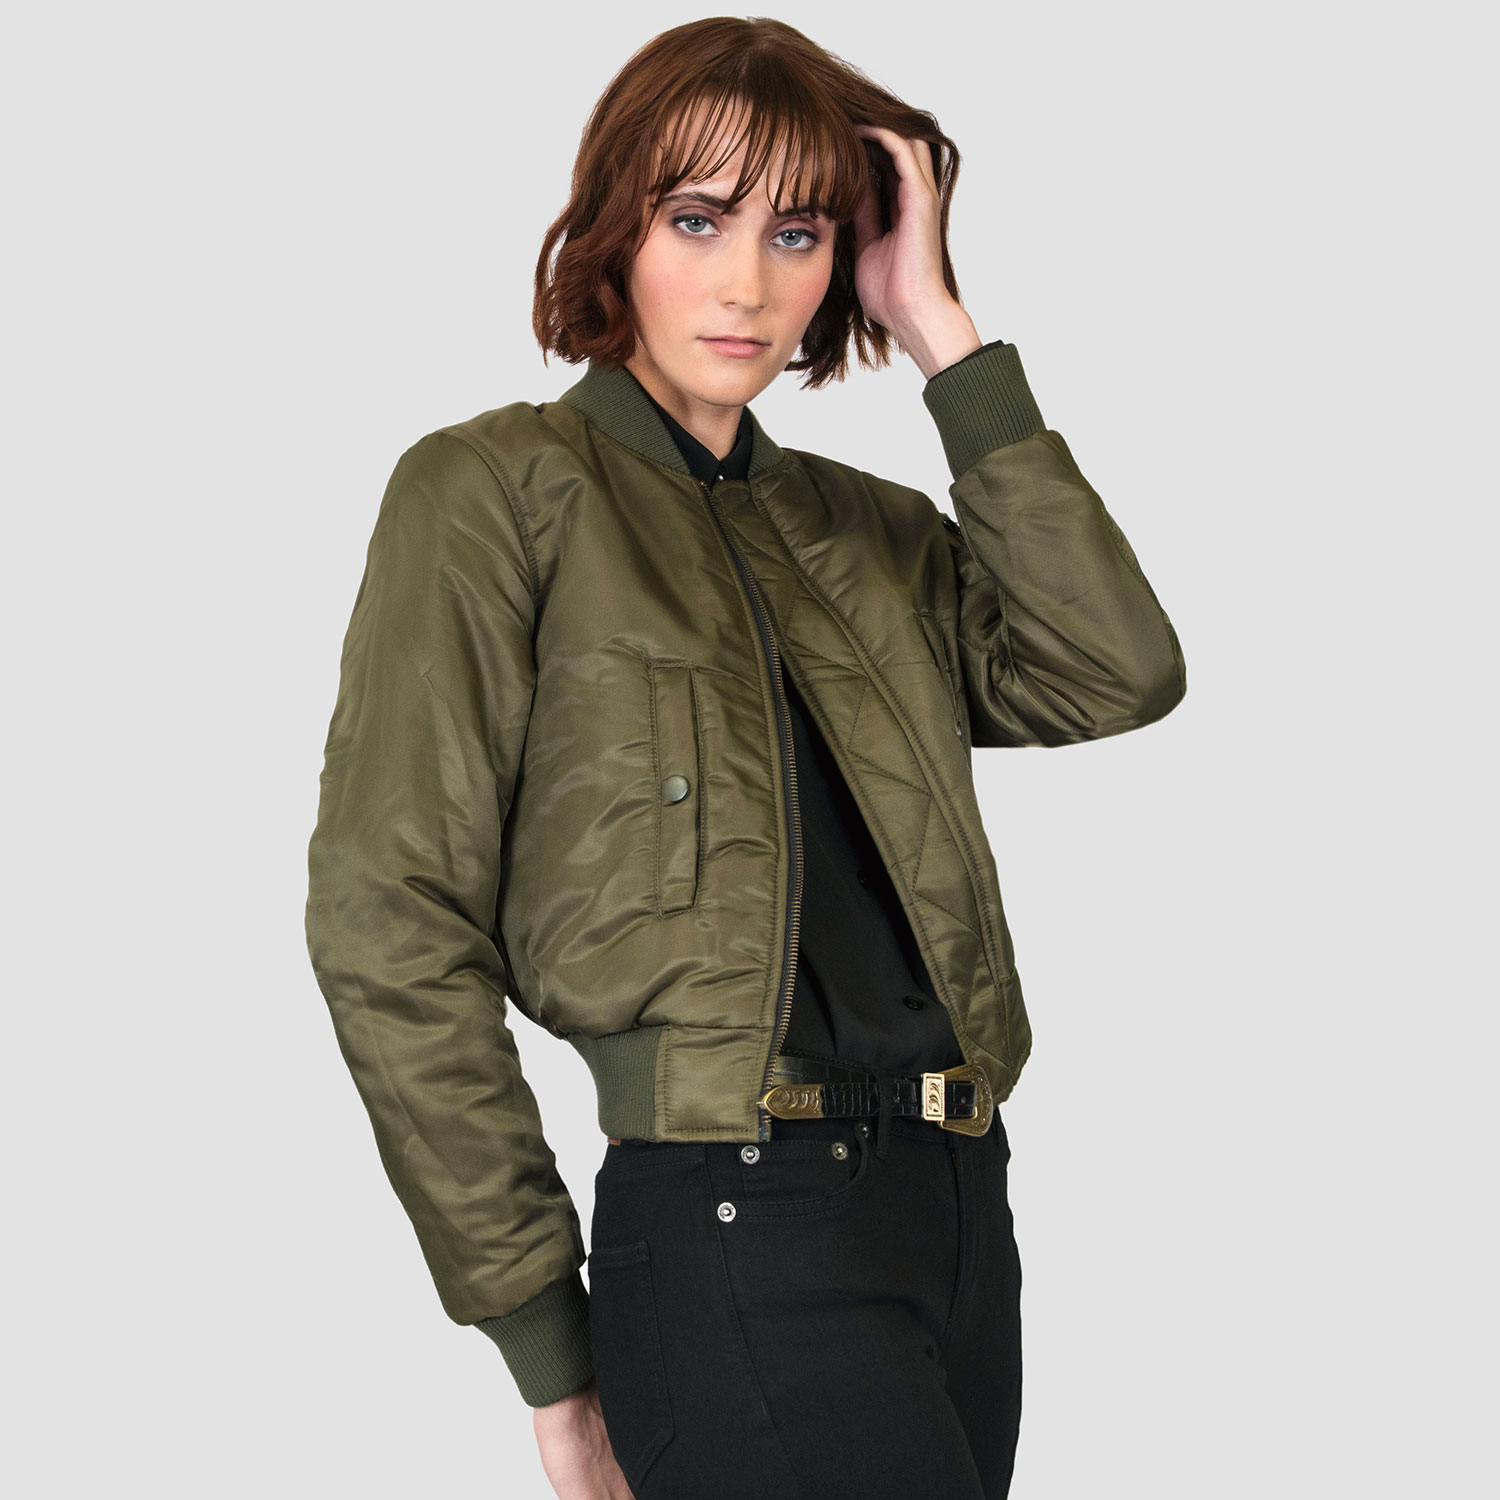 Straight to Hell Del Bomber - Black and Green Reversible Flight Jacket